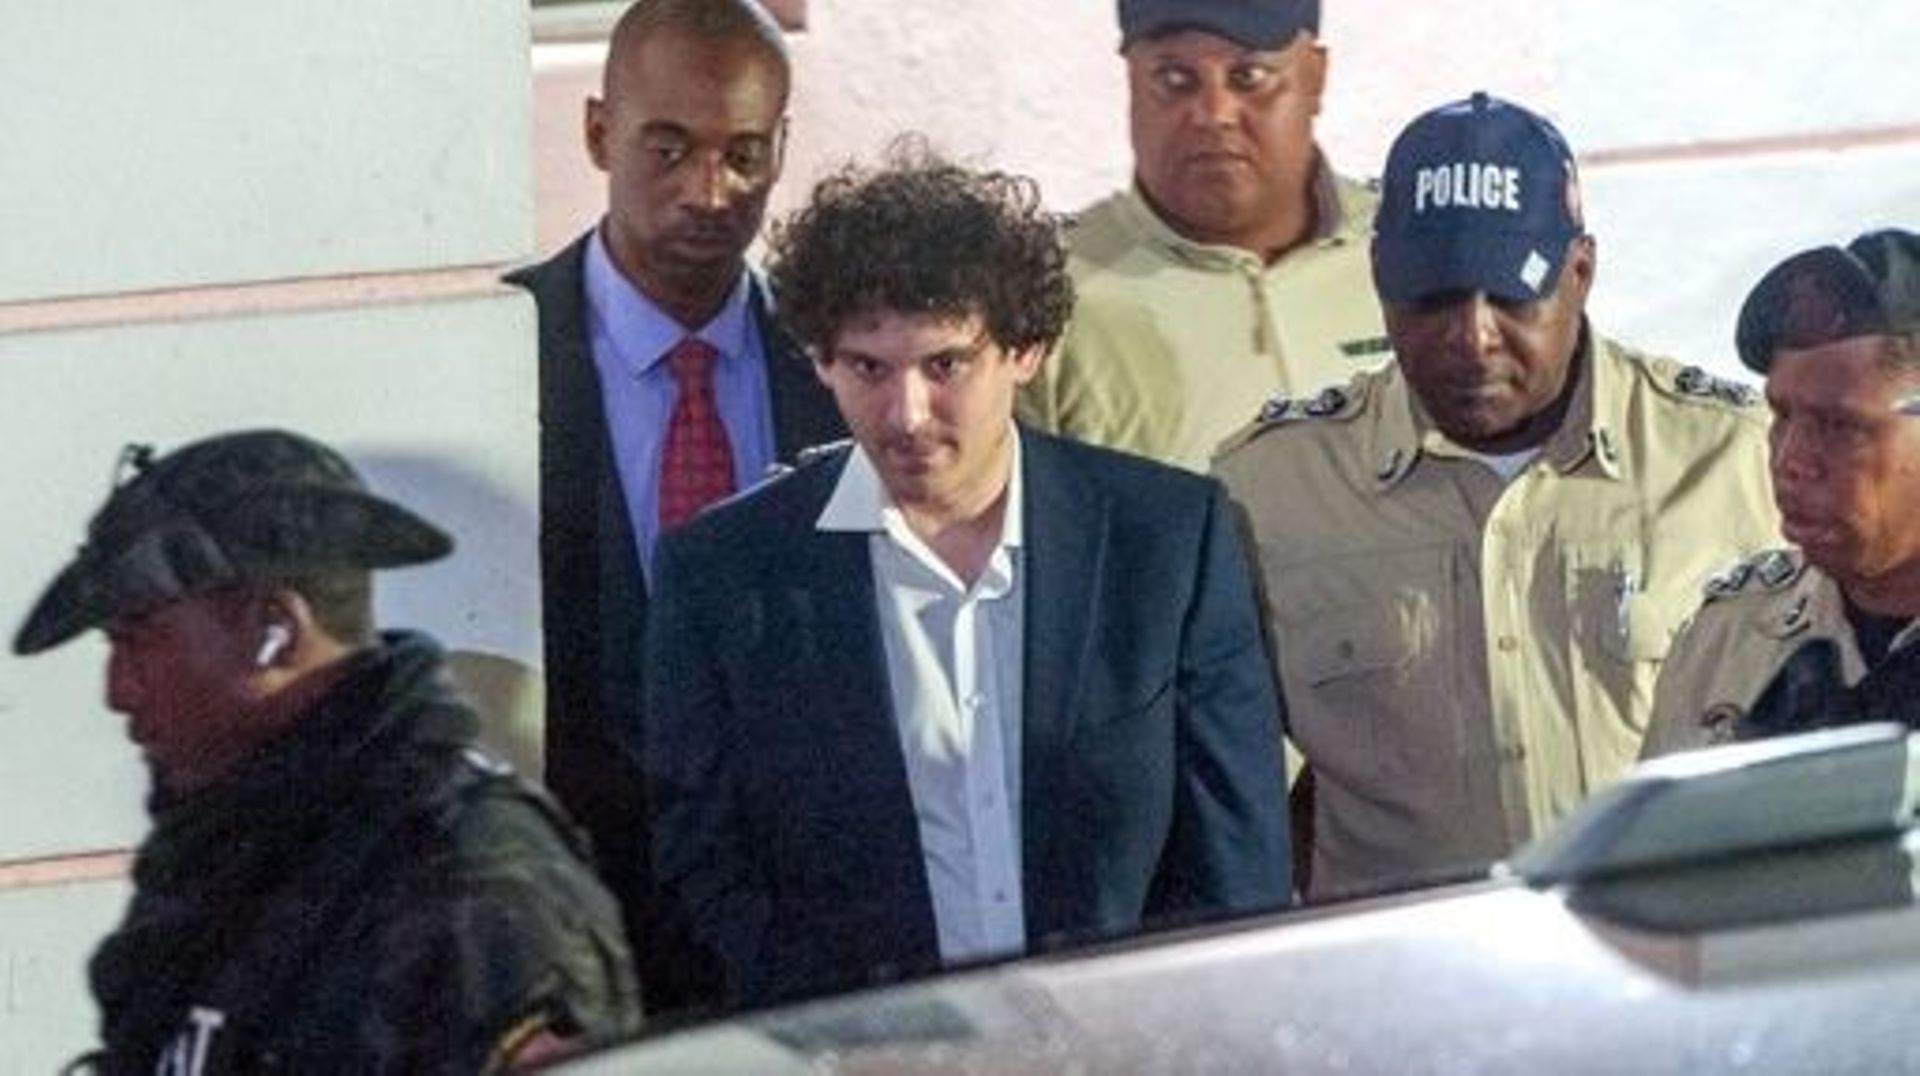 FTX founder Sam Bankman-Fried (C) is led away handcuffed by officers of the Royal Bahamas Police Force in Nassau, Bahamas on December 13, 2022.  Disgraced cryptocurrency tycoon Sam Bankman-Fried was hit with multiple criminal charges December 13, 2022, ac